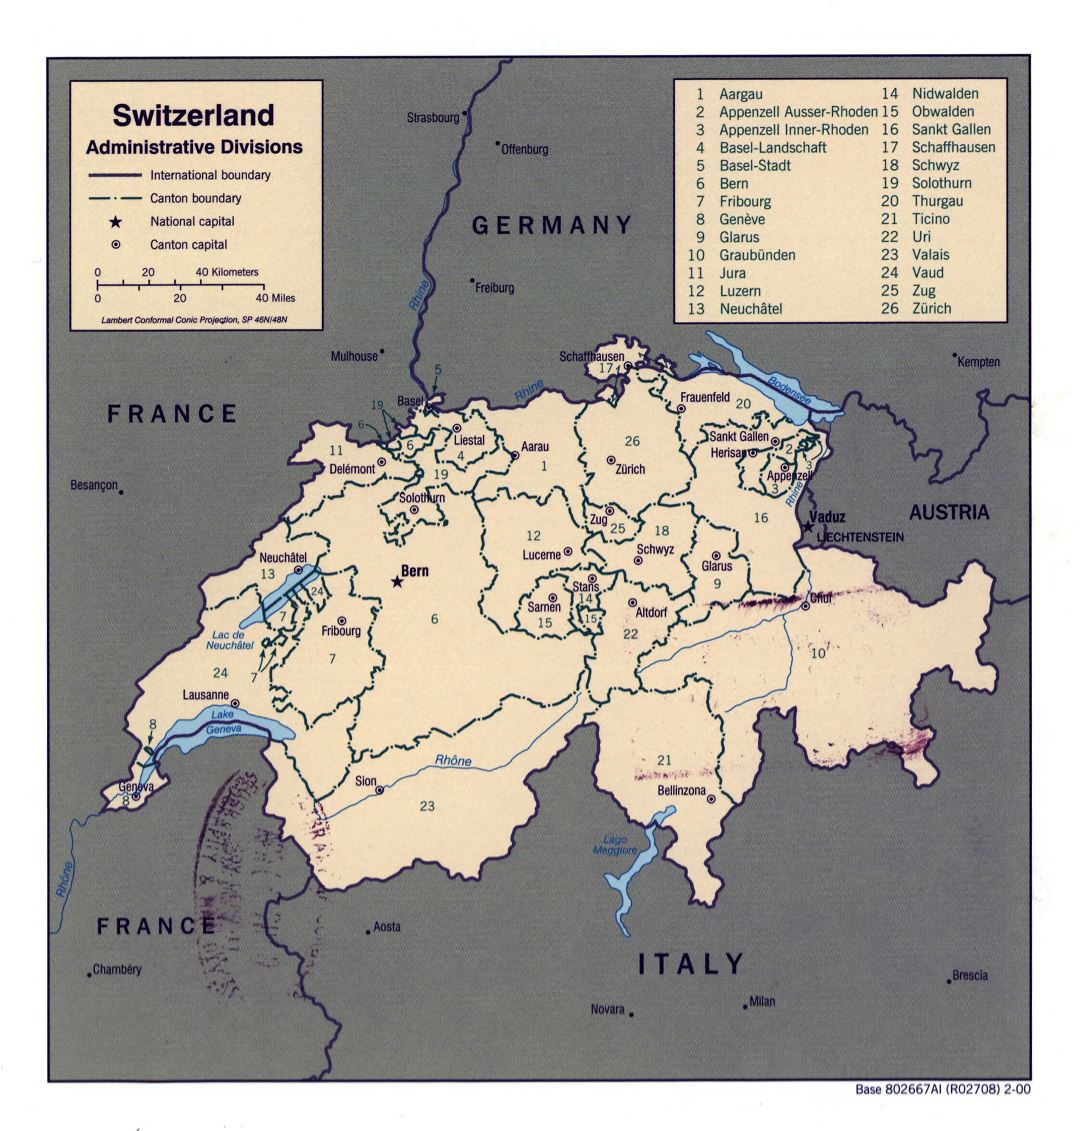 Large detailed administrative divisions map of Switzerland - 2000